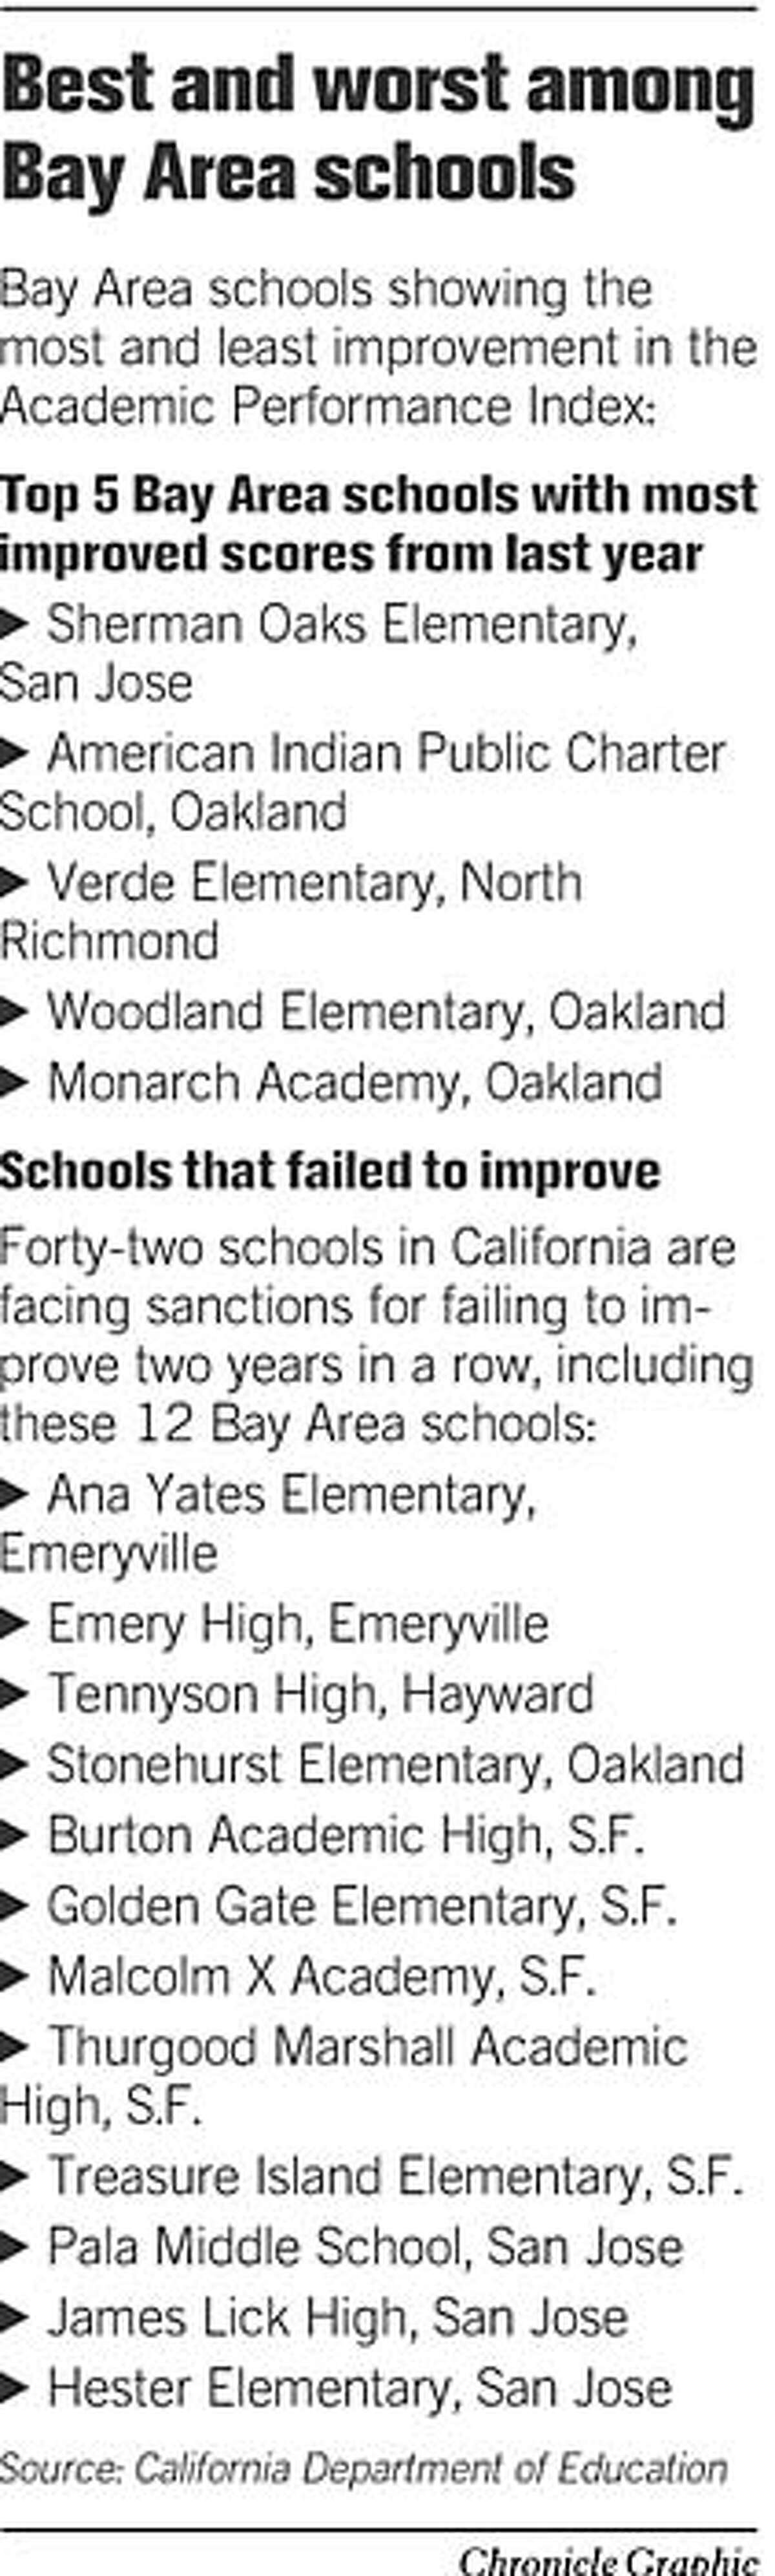 california-school-rankings-improve-bay-area-also-sees-big-gains-in-academic-performance-index